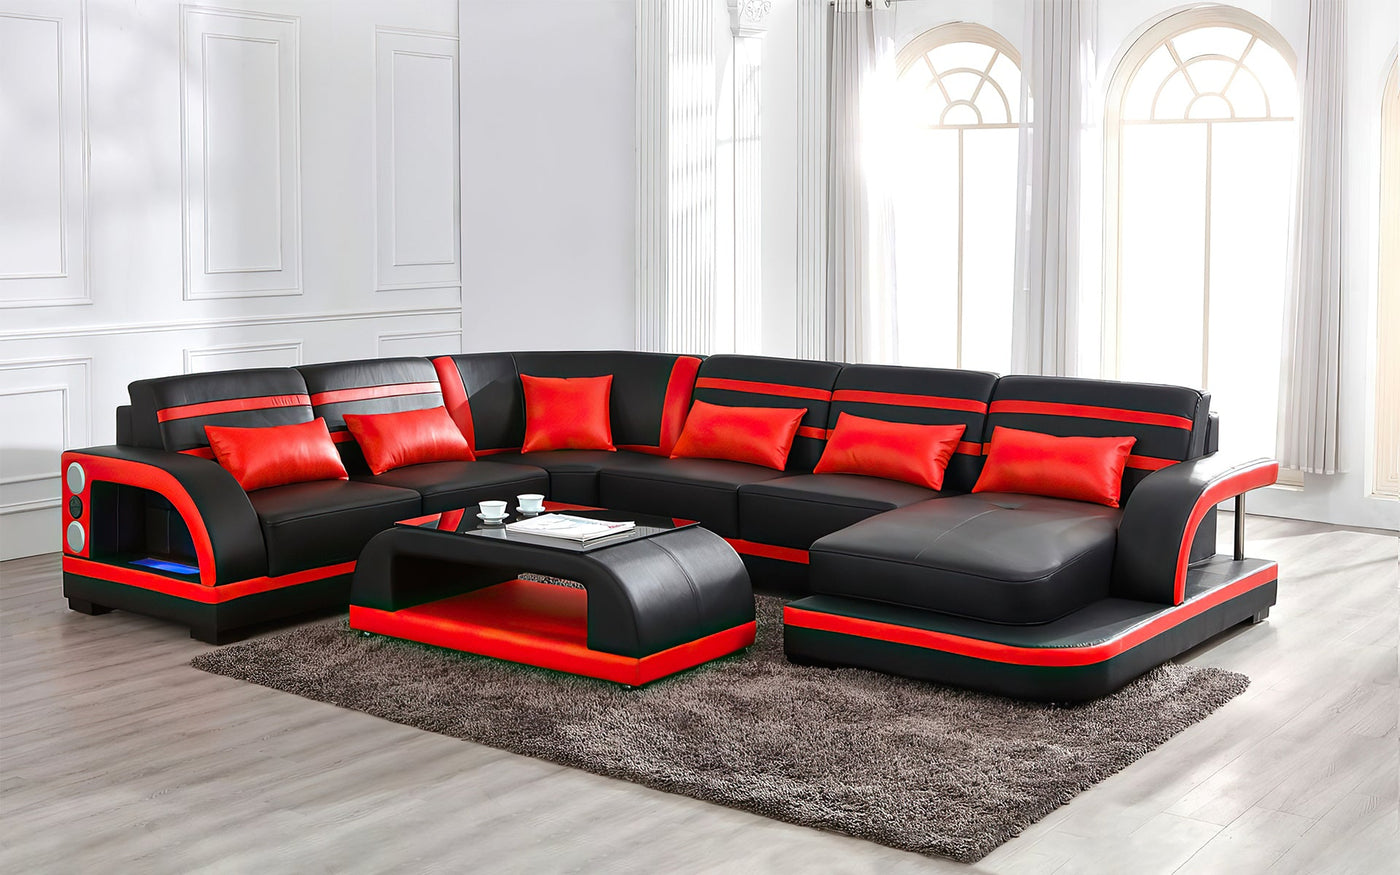 Amaiya 155.6 Wide Leather Match Corner Sectional Orren Ellis Fabric: Red Leather Match, Orientation: Left Hand Facing